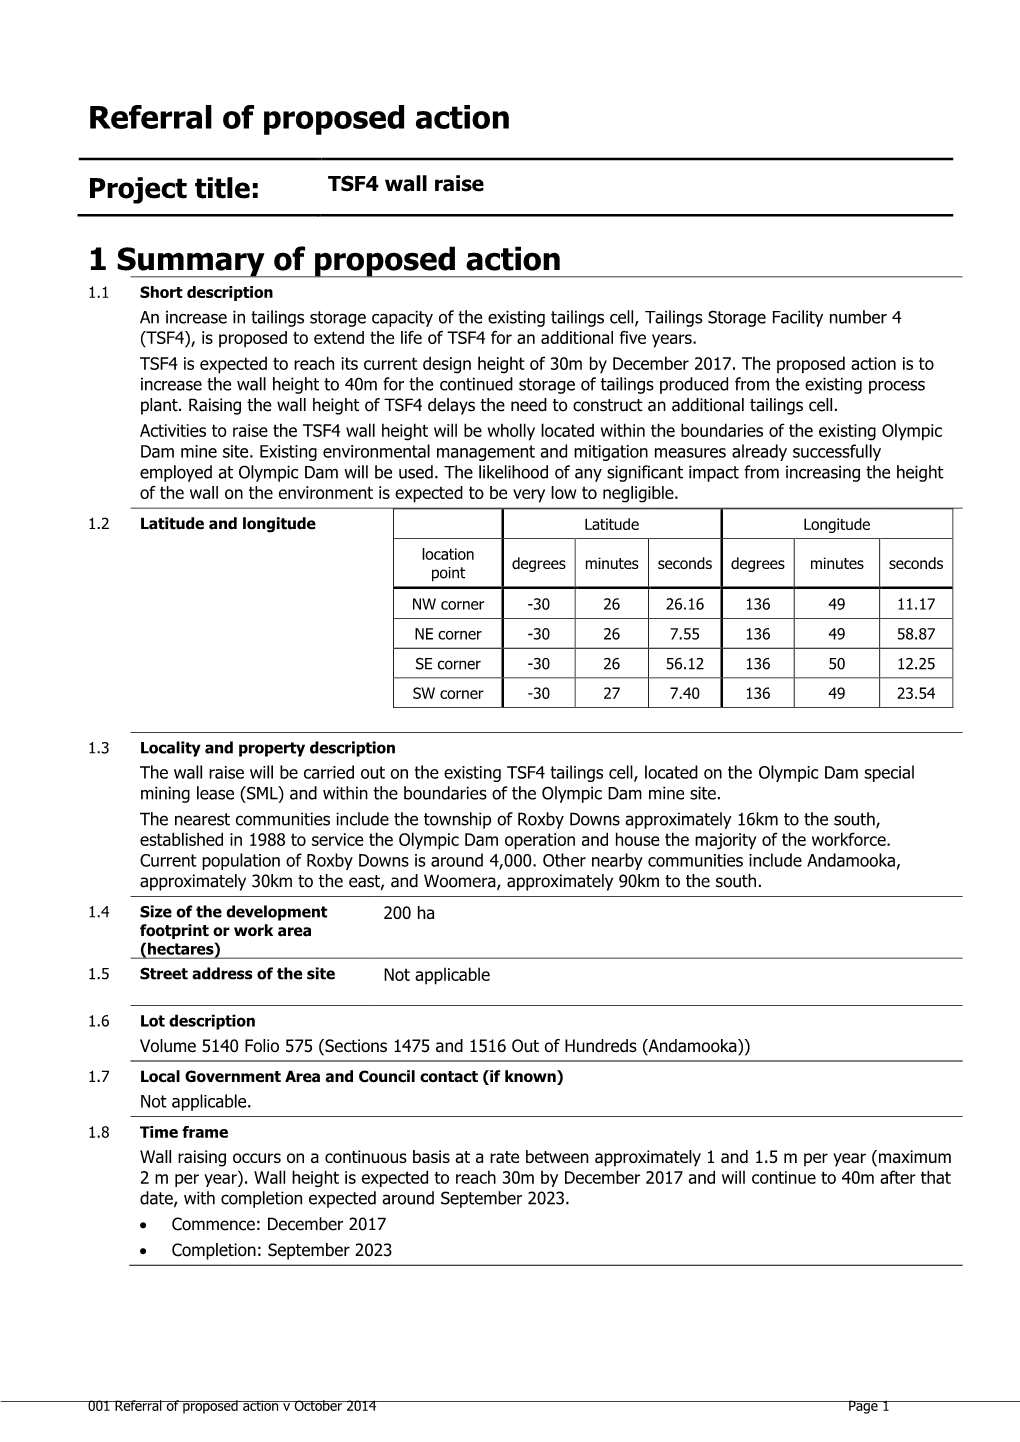 Referral of Proposed Action